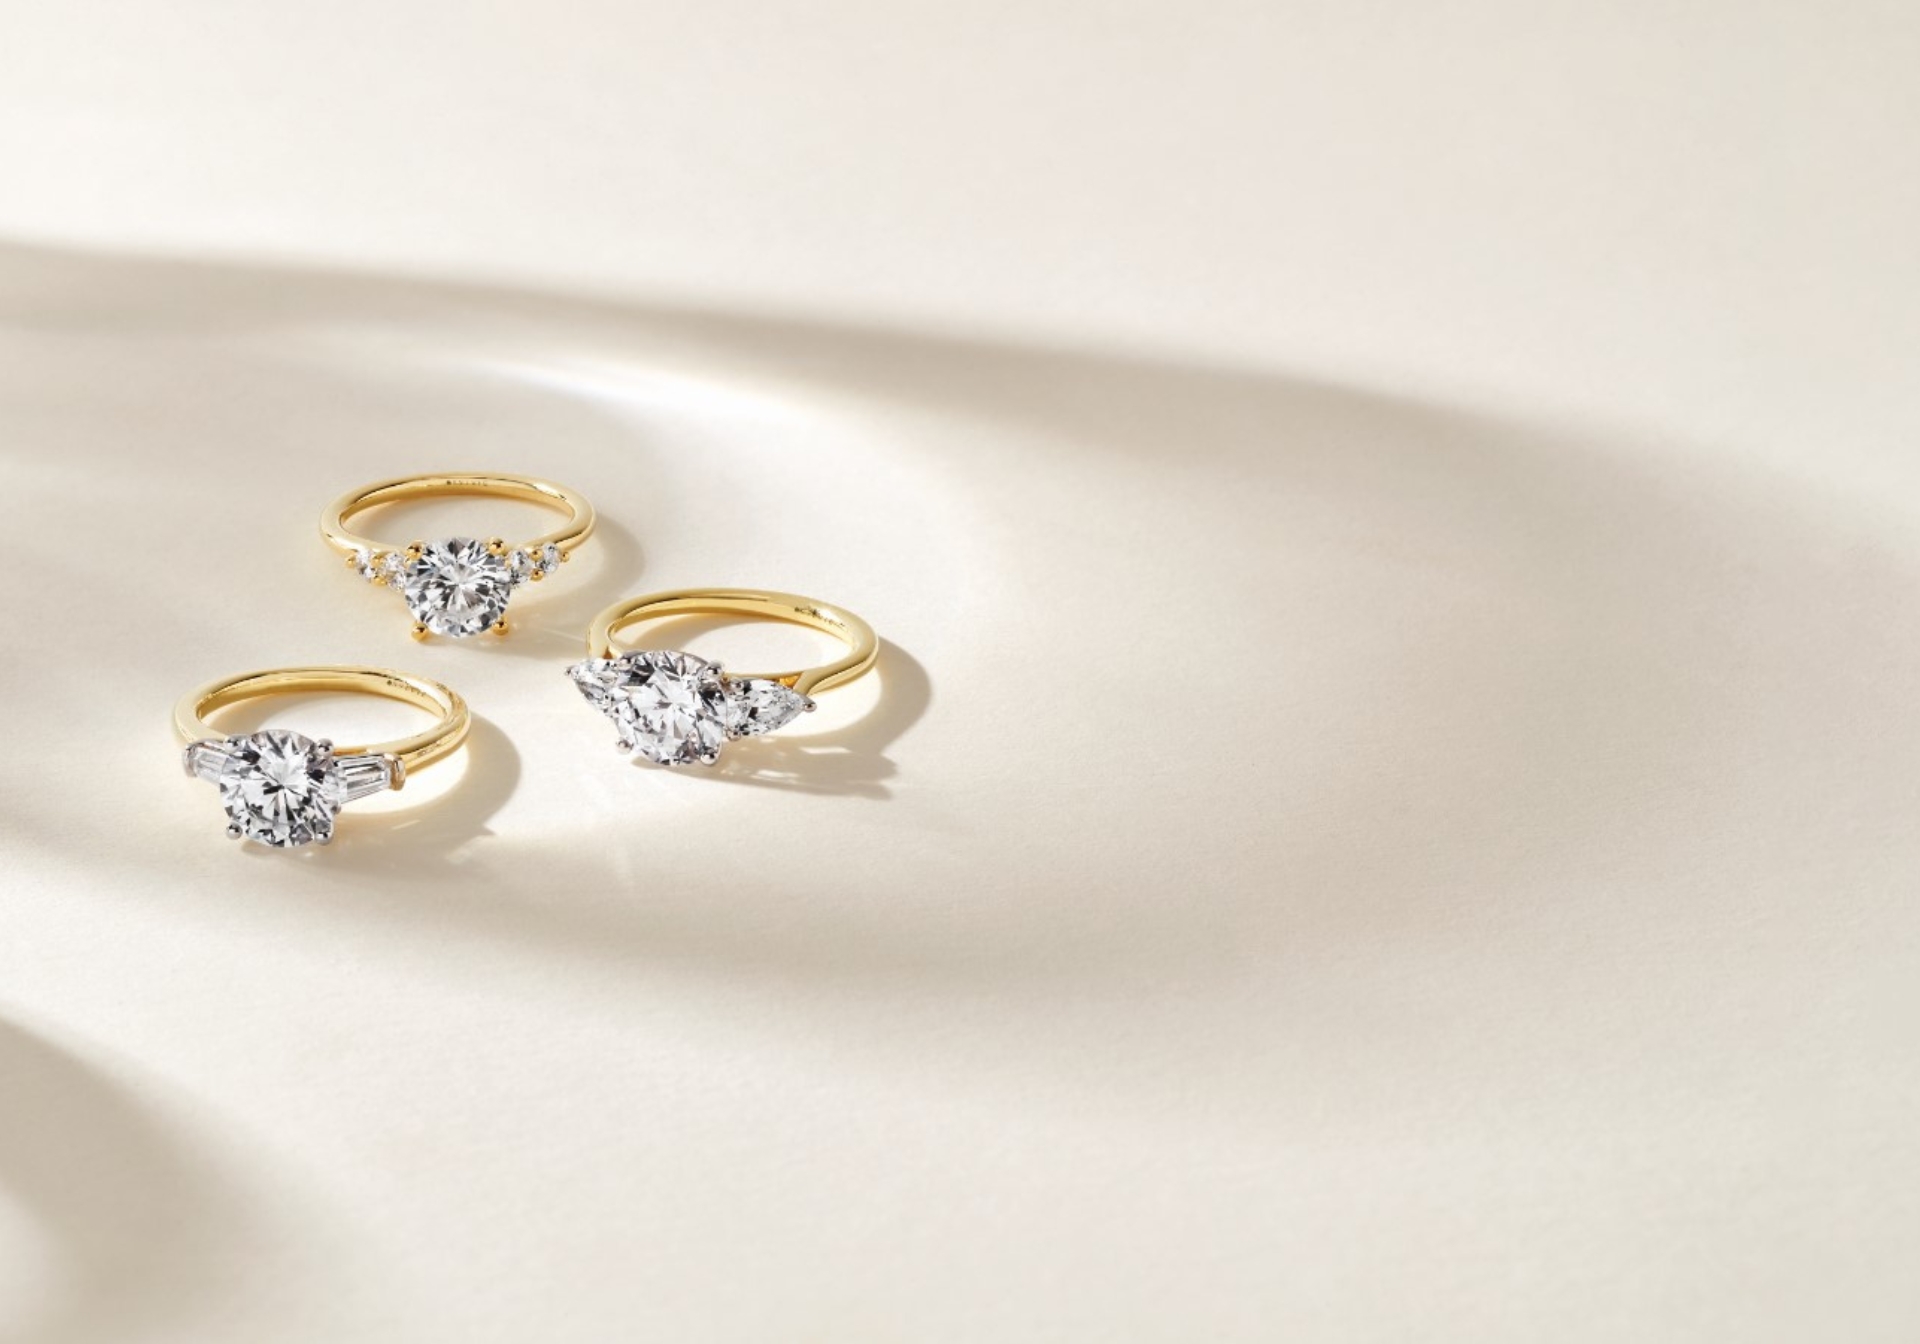 Engagement rings at Geiss & Sons Jewelers